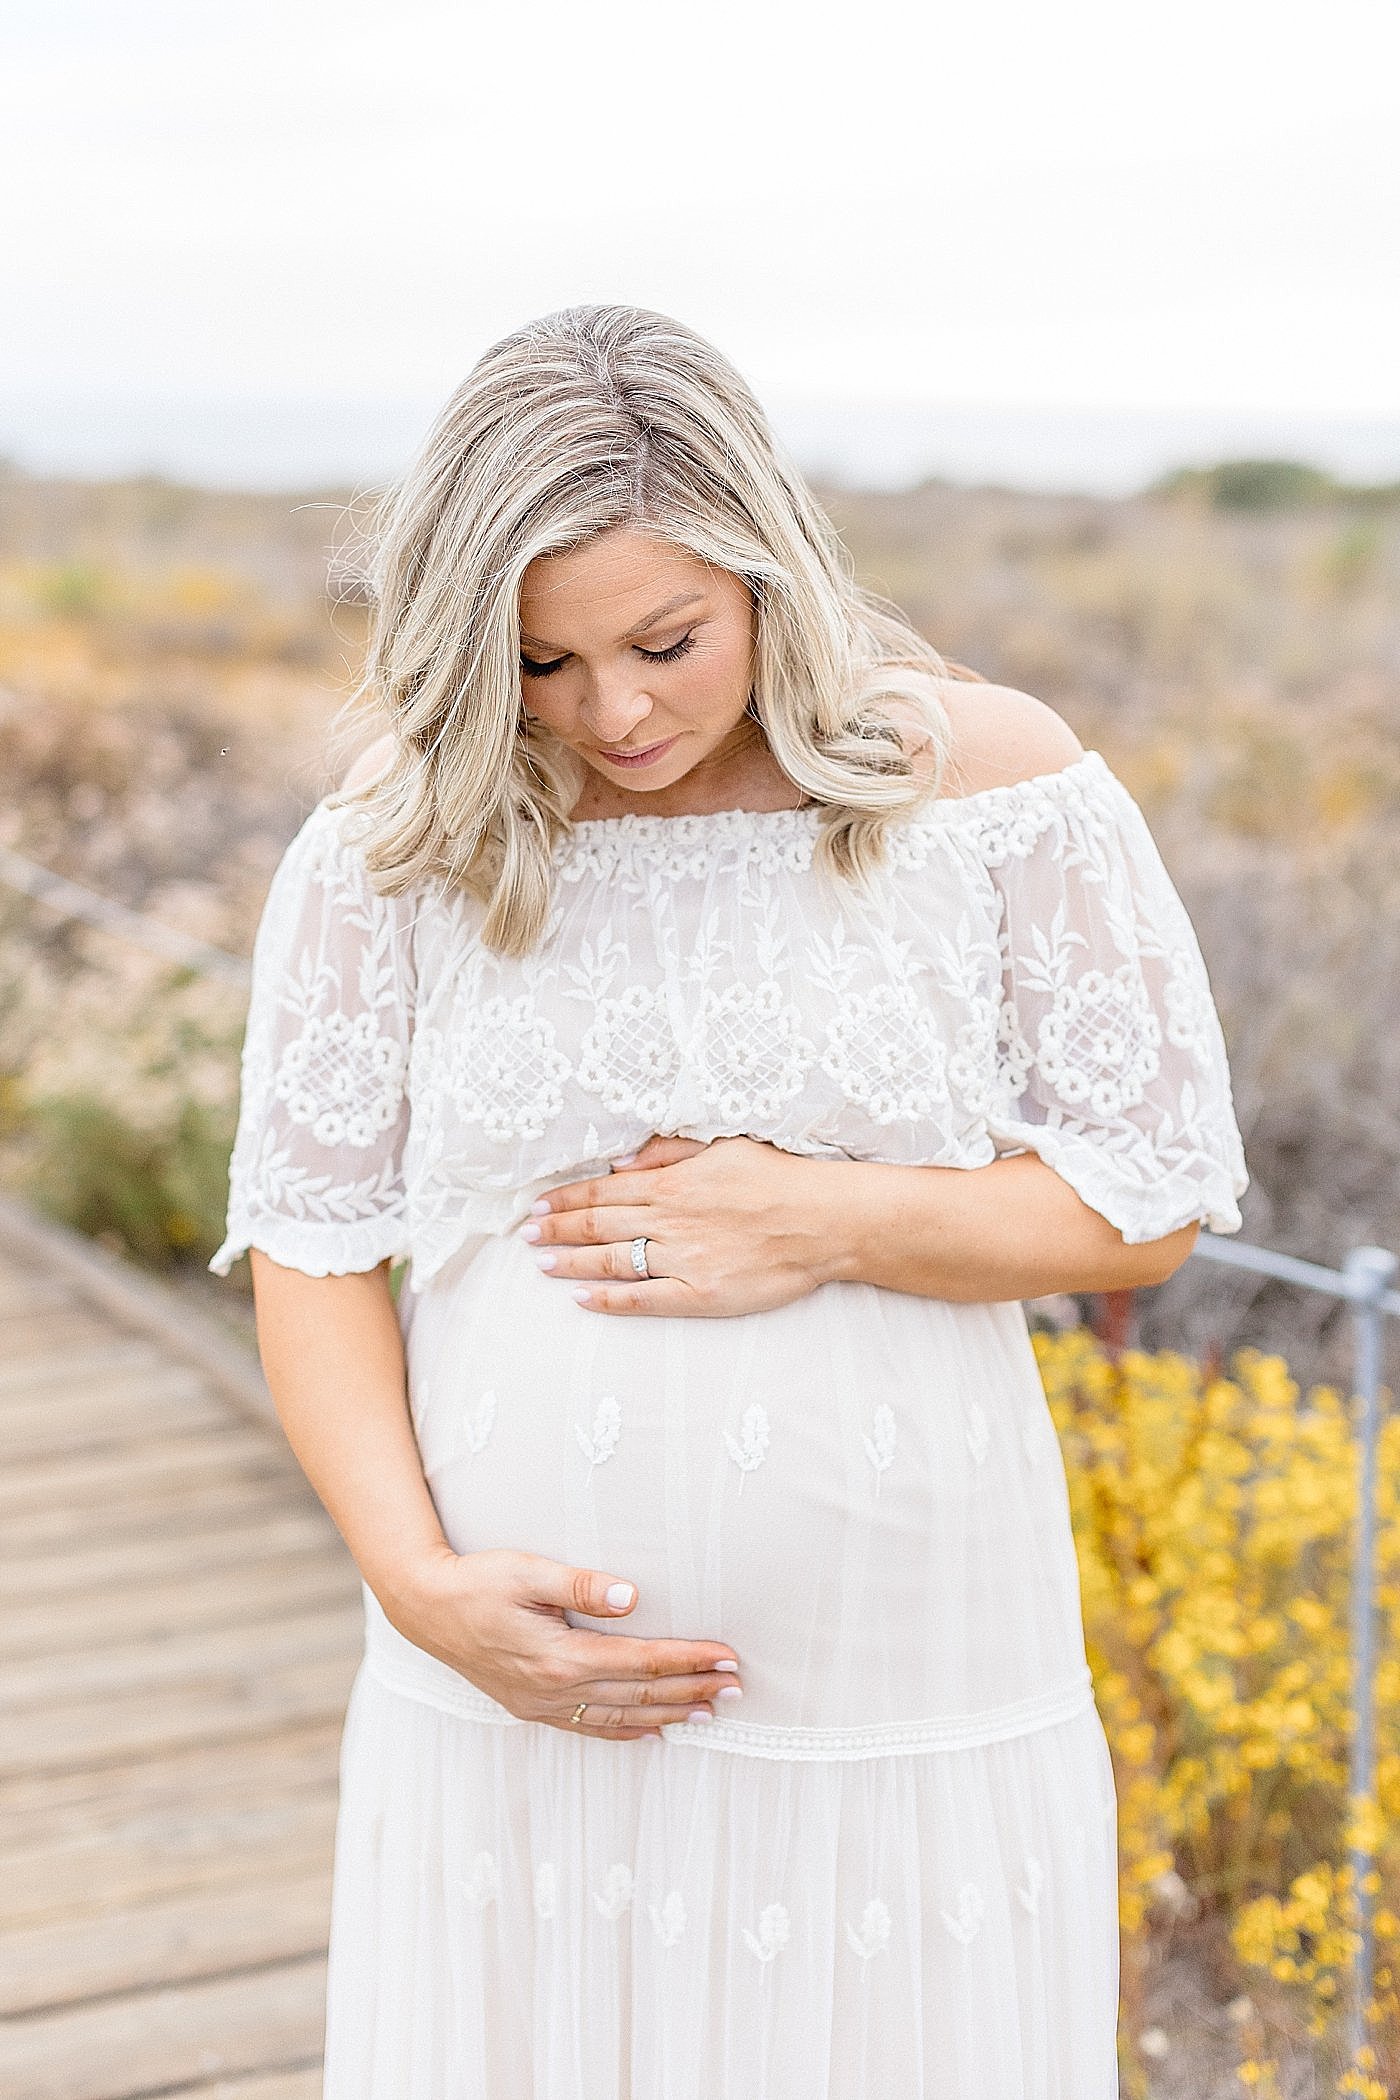 Tips-On-What-To-Wear-For-A-Maternity-Session-Newport-Beach-Maternity-Photographer_0021.jpg